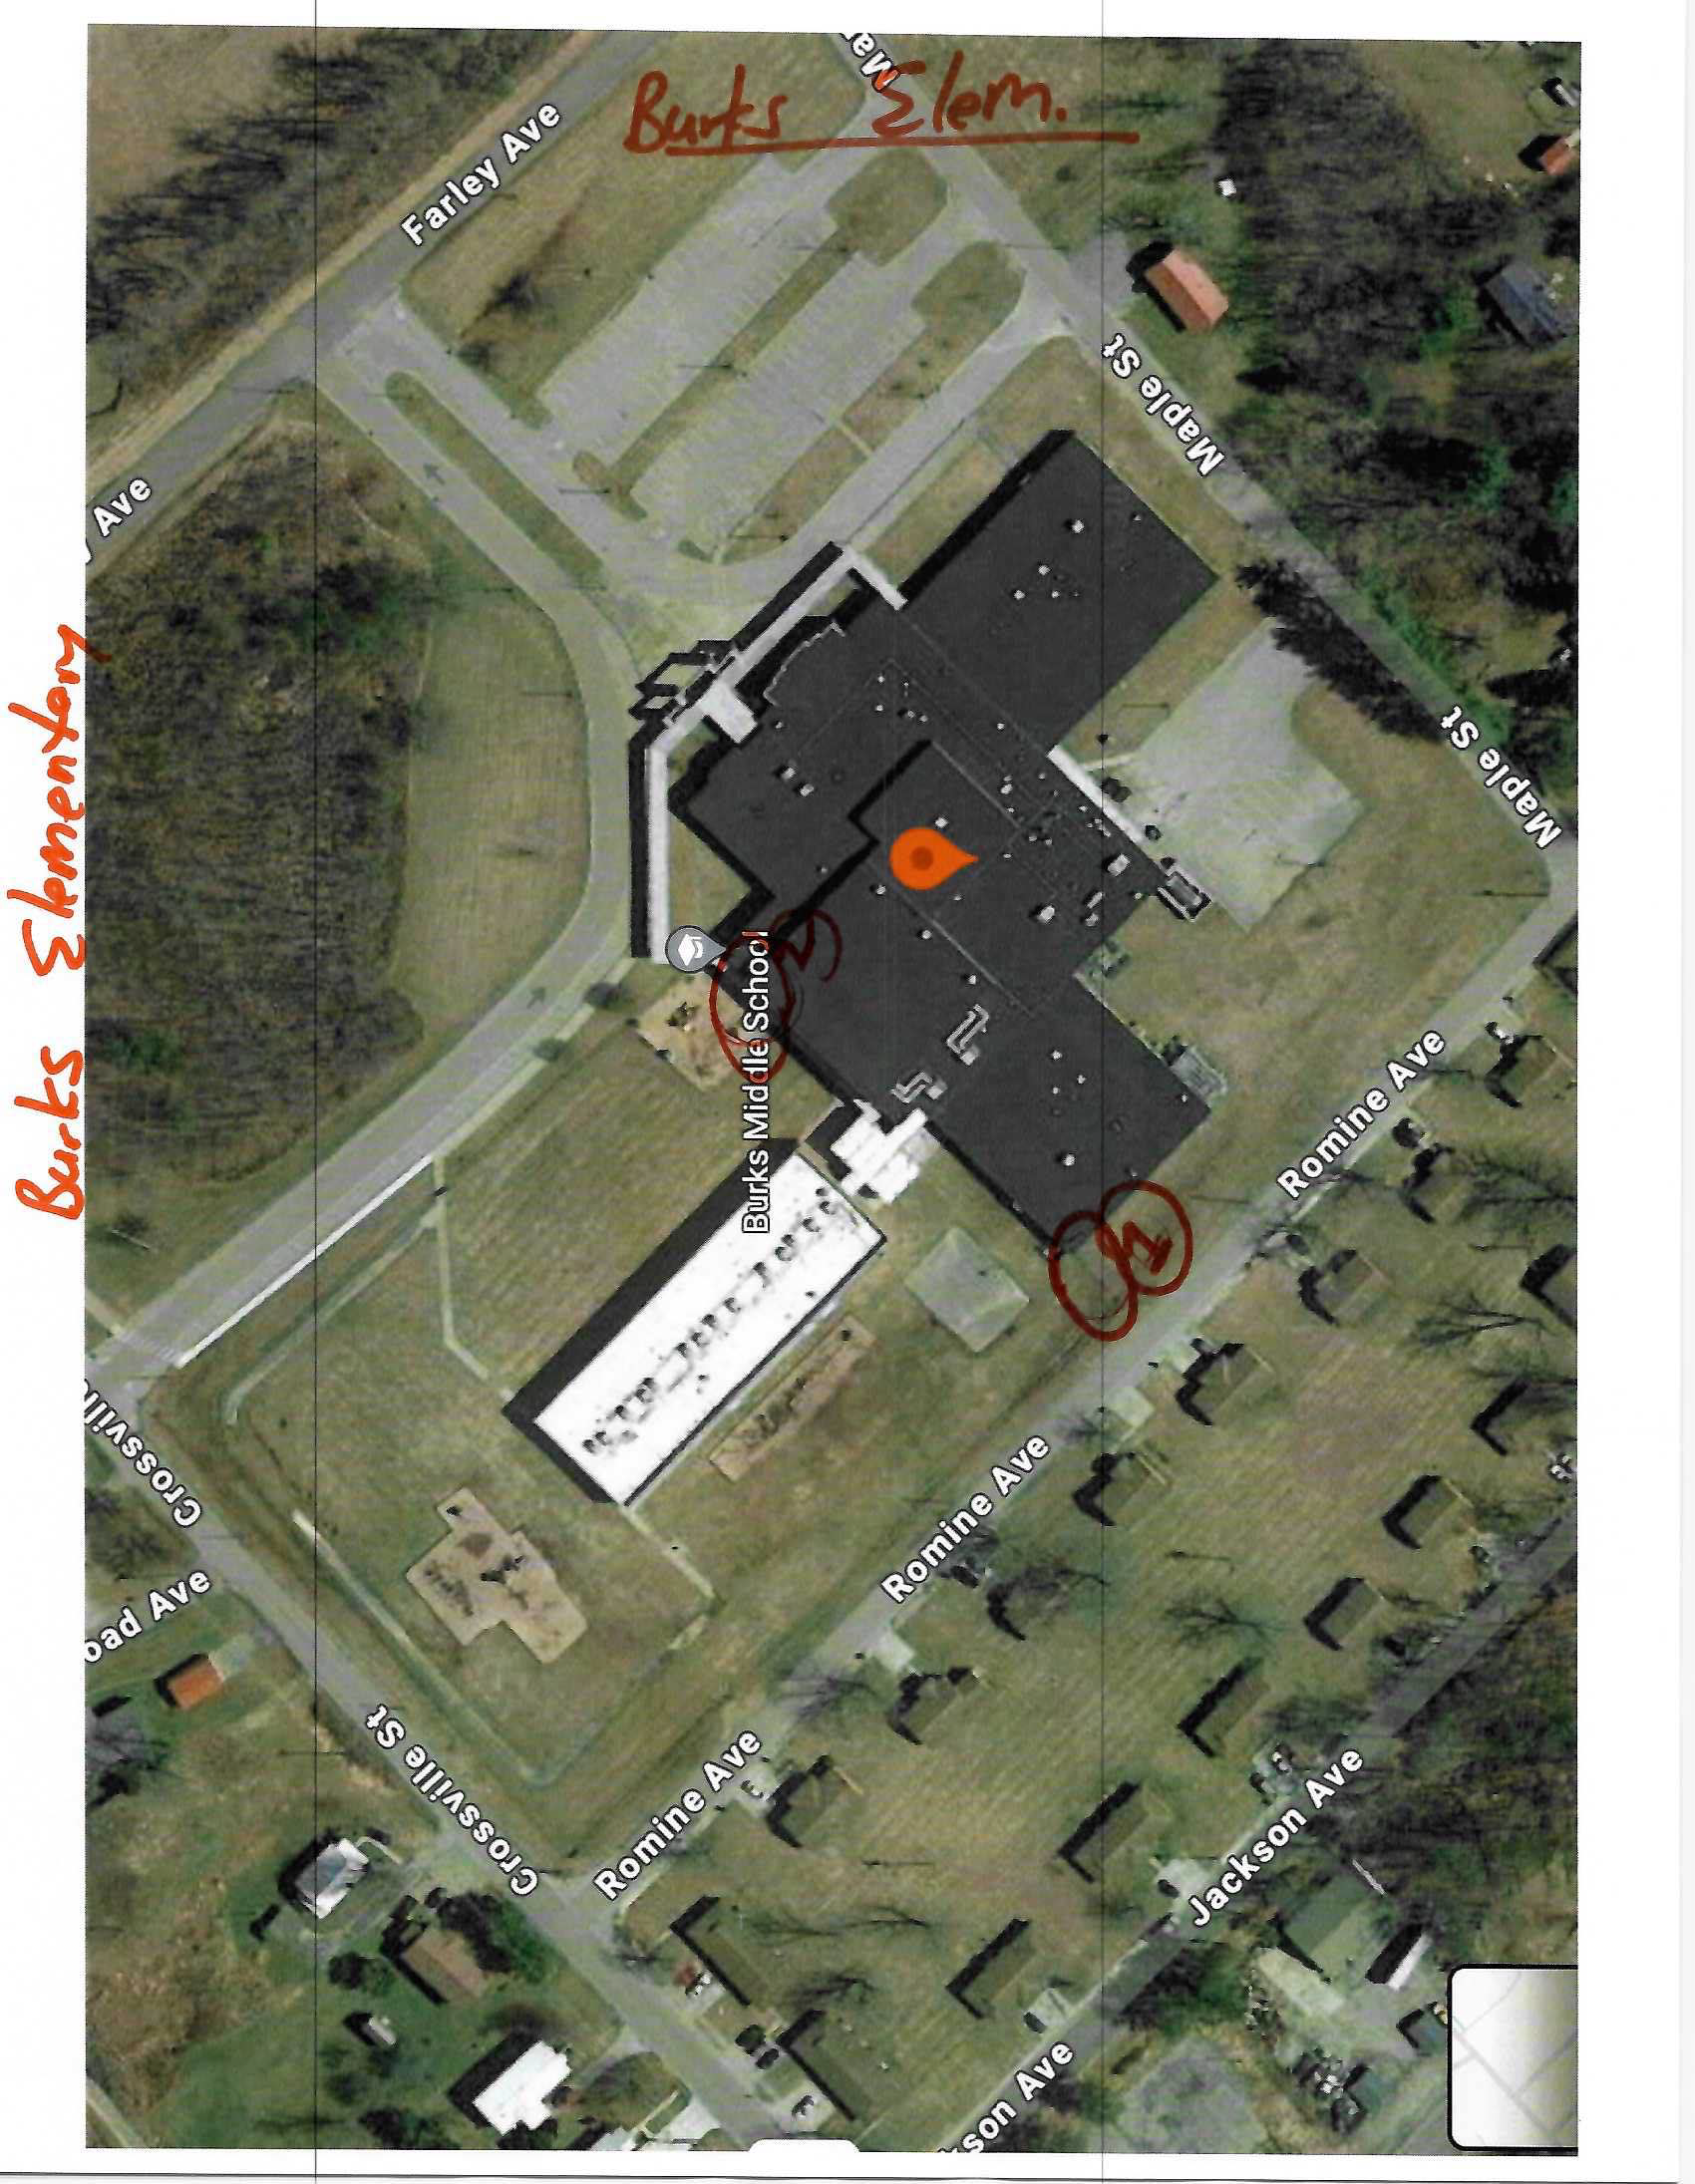 The image shows an overhead view of Burks Elementary School